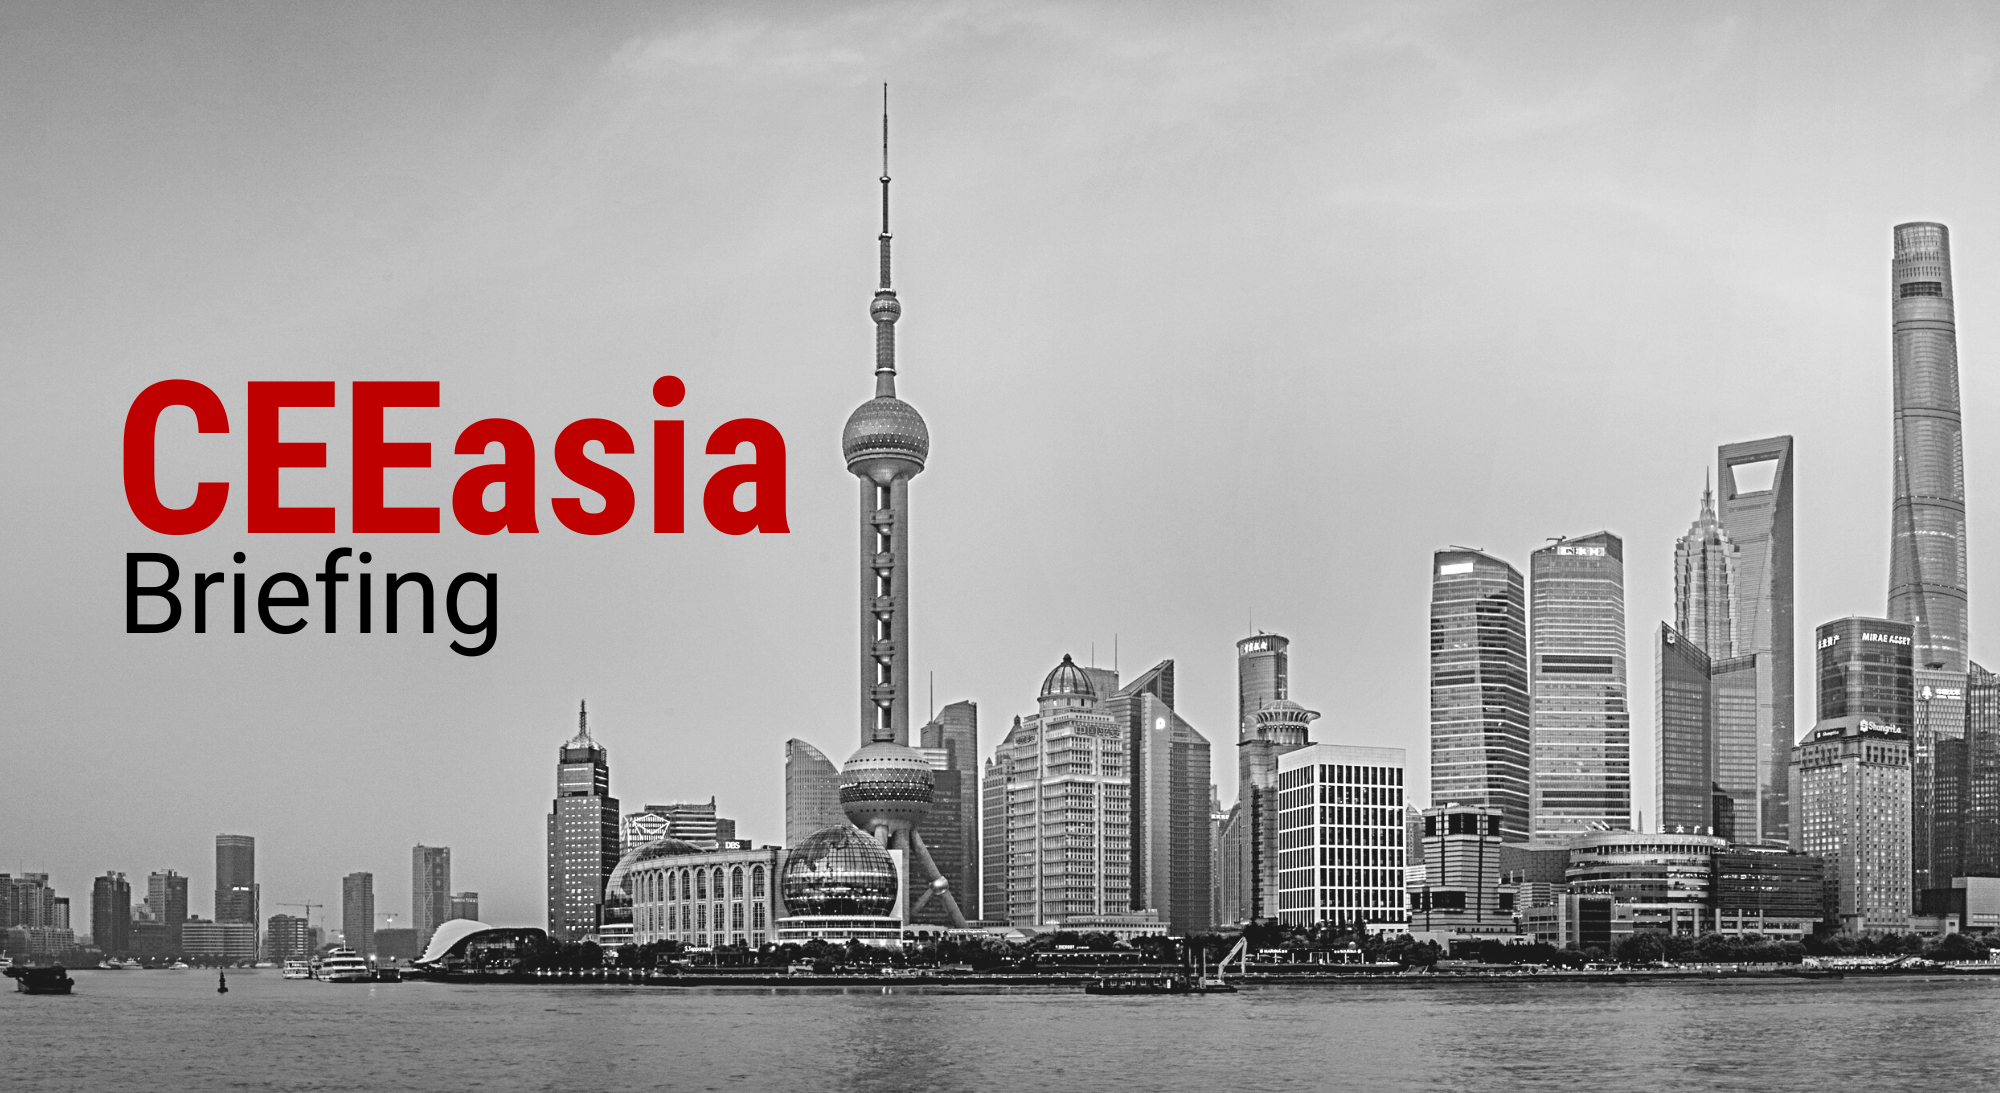 CEEasia Briefing #10: China-Czechia-Taiwan spy triangle, CEE’s falling out with Huawei, Serbia: China’s fellow engages in a balancing act, Polish LOT airlines broaden connections with India